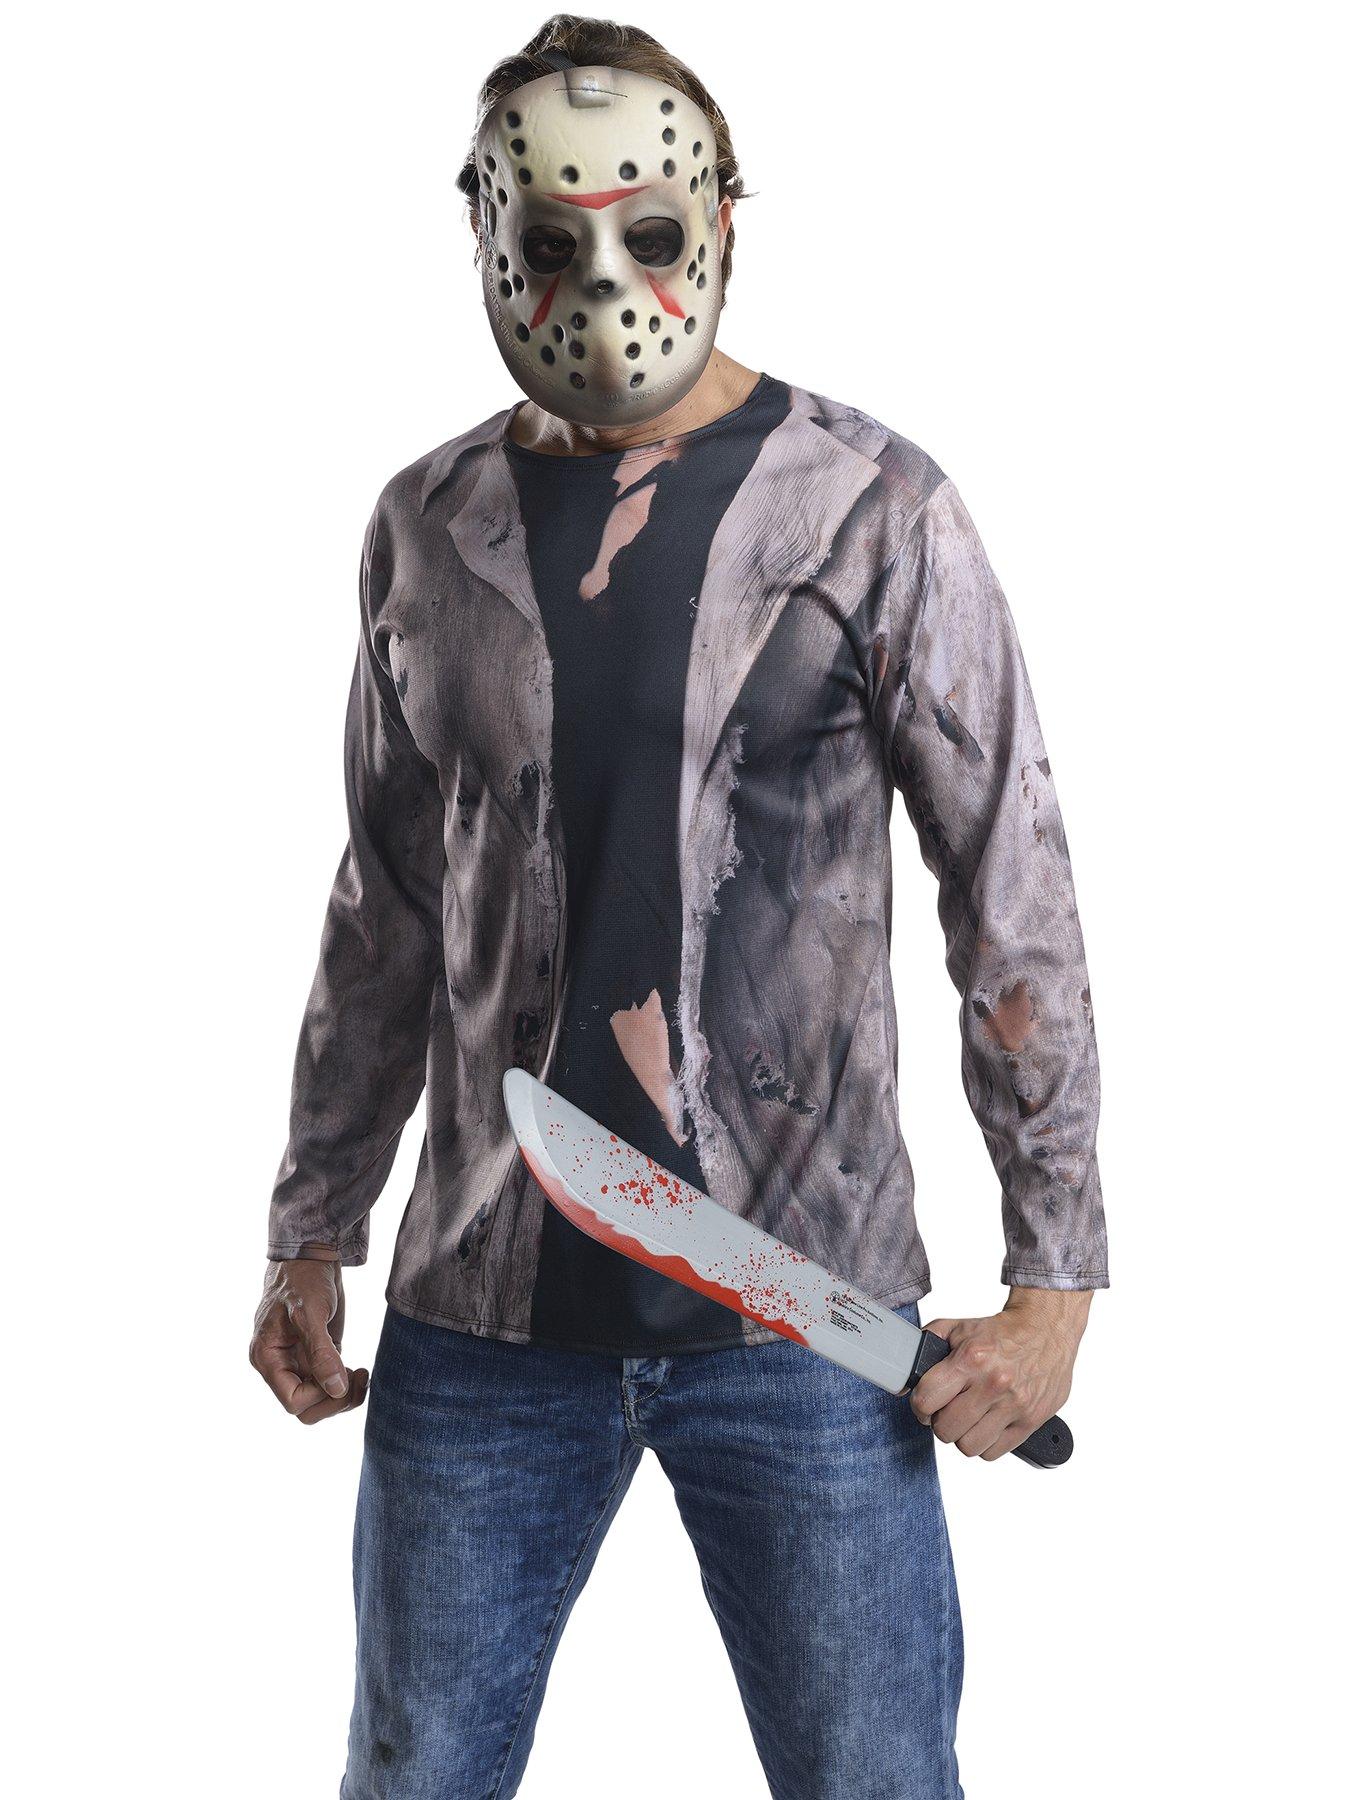 Friday The 13th Jason Voorhees Costume Set - jason from friday the 13th halloween t shirt roblox